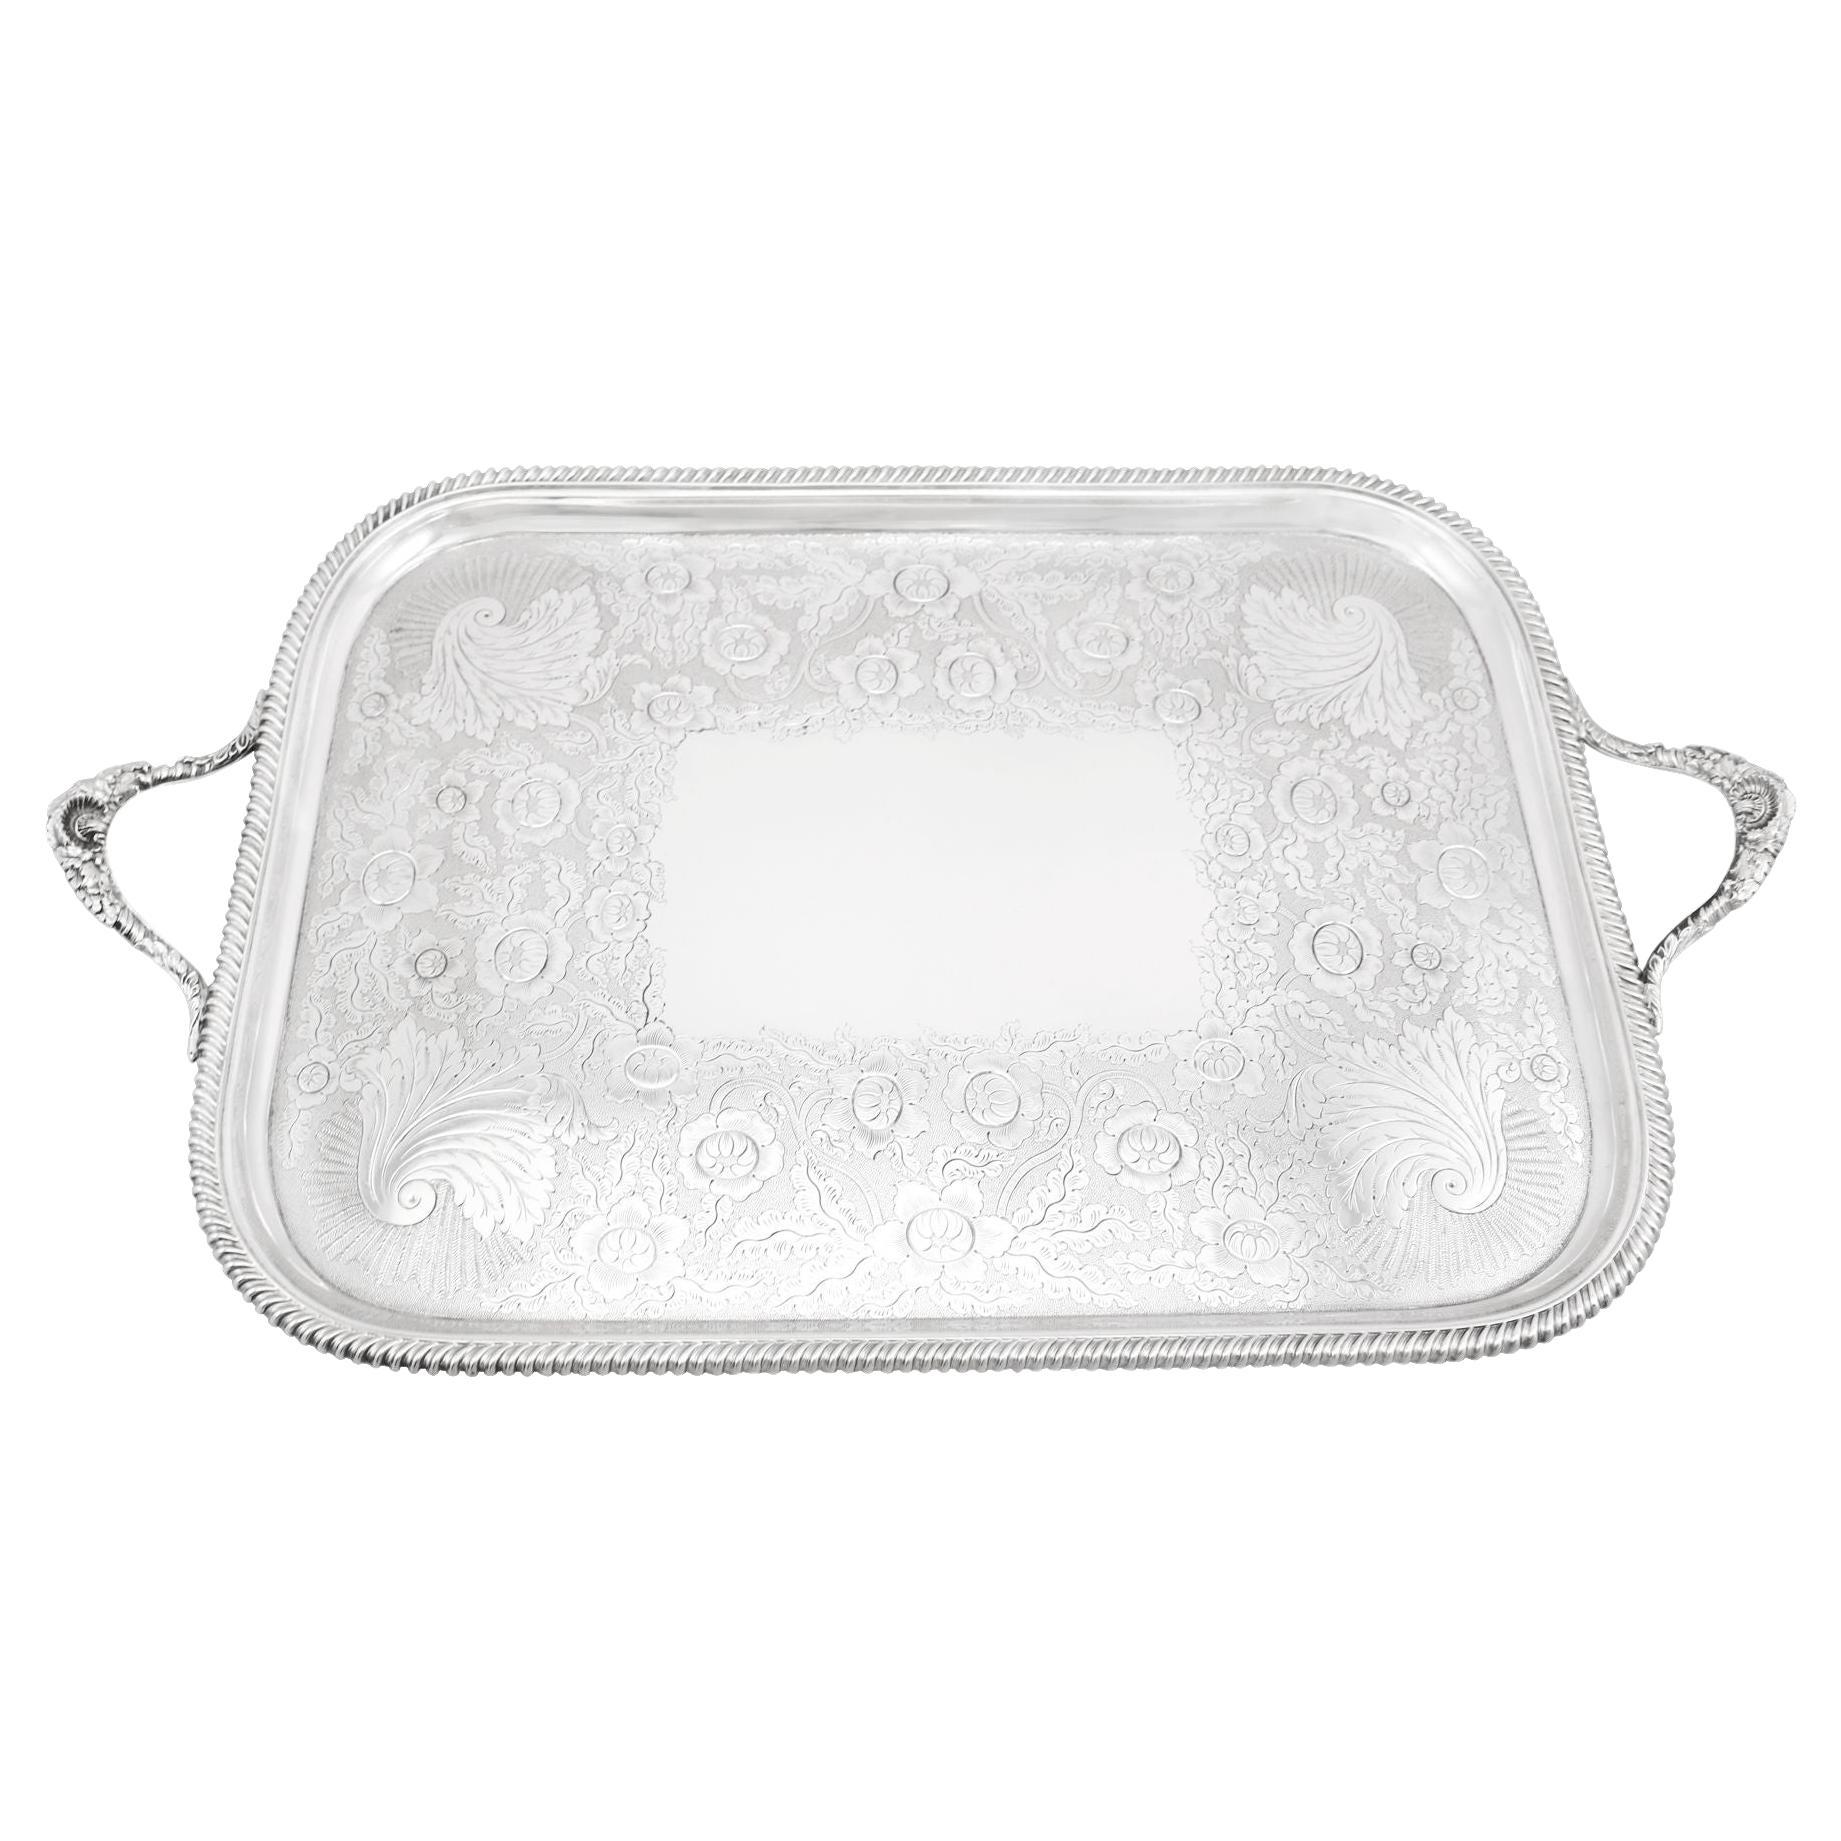 Antique Victorian Sterling Silver Tray by Thomas Bradbury & Sons For Sale